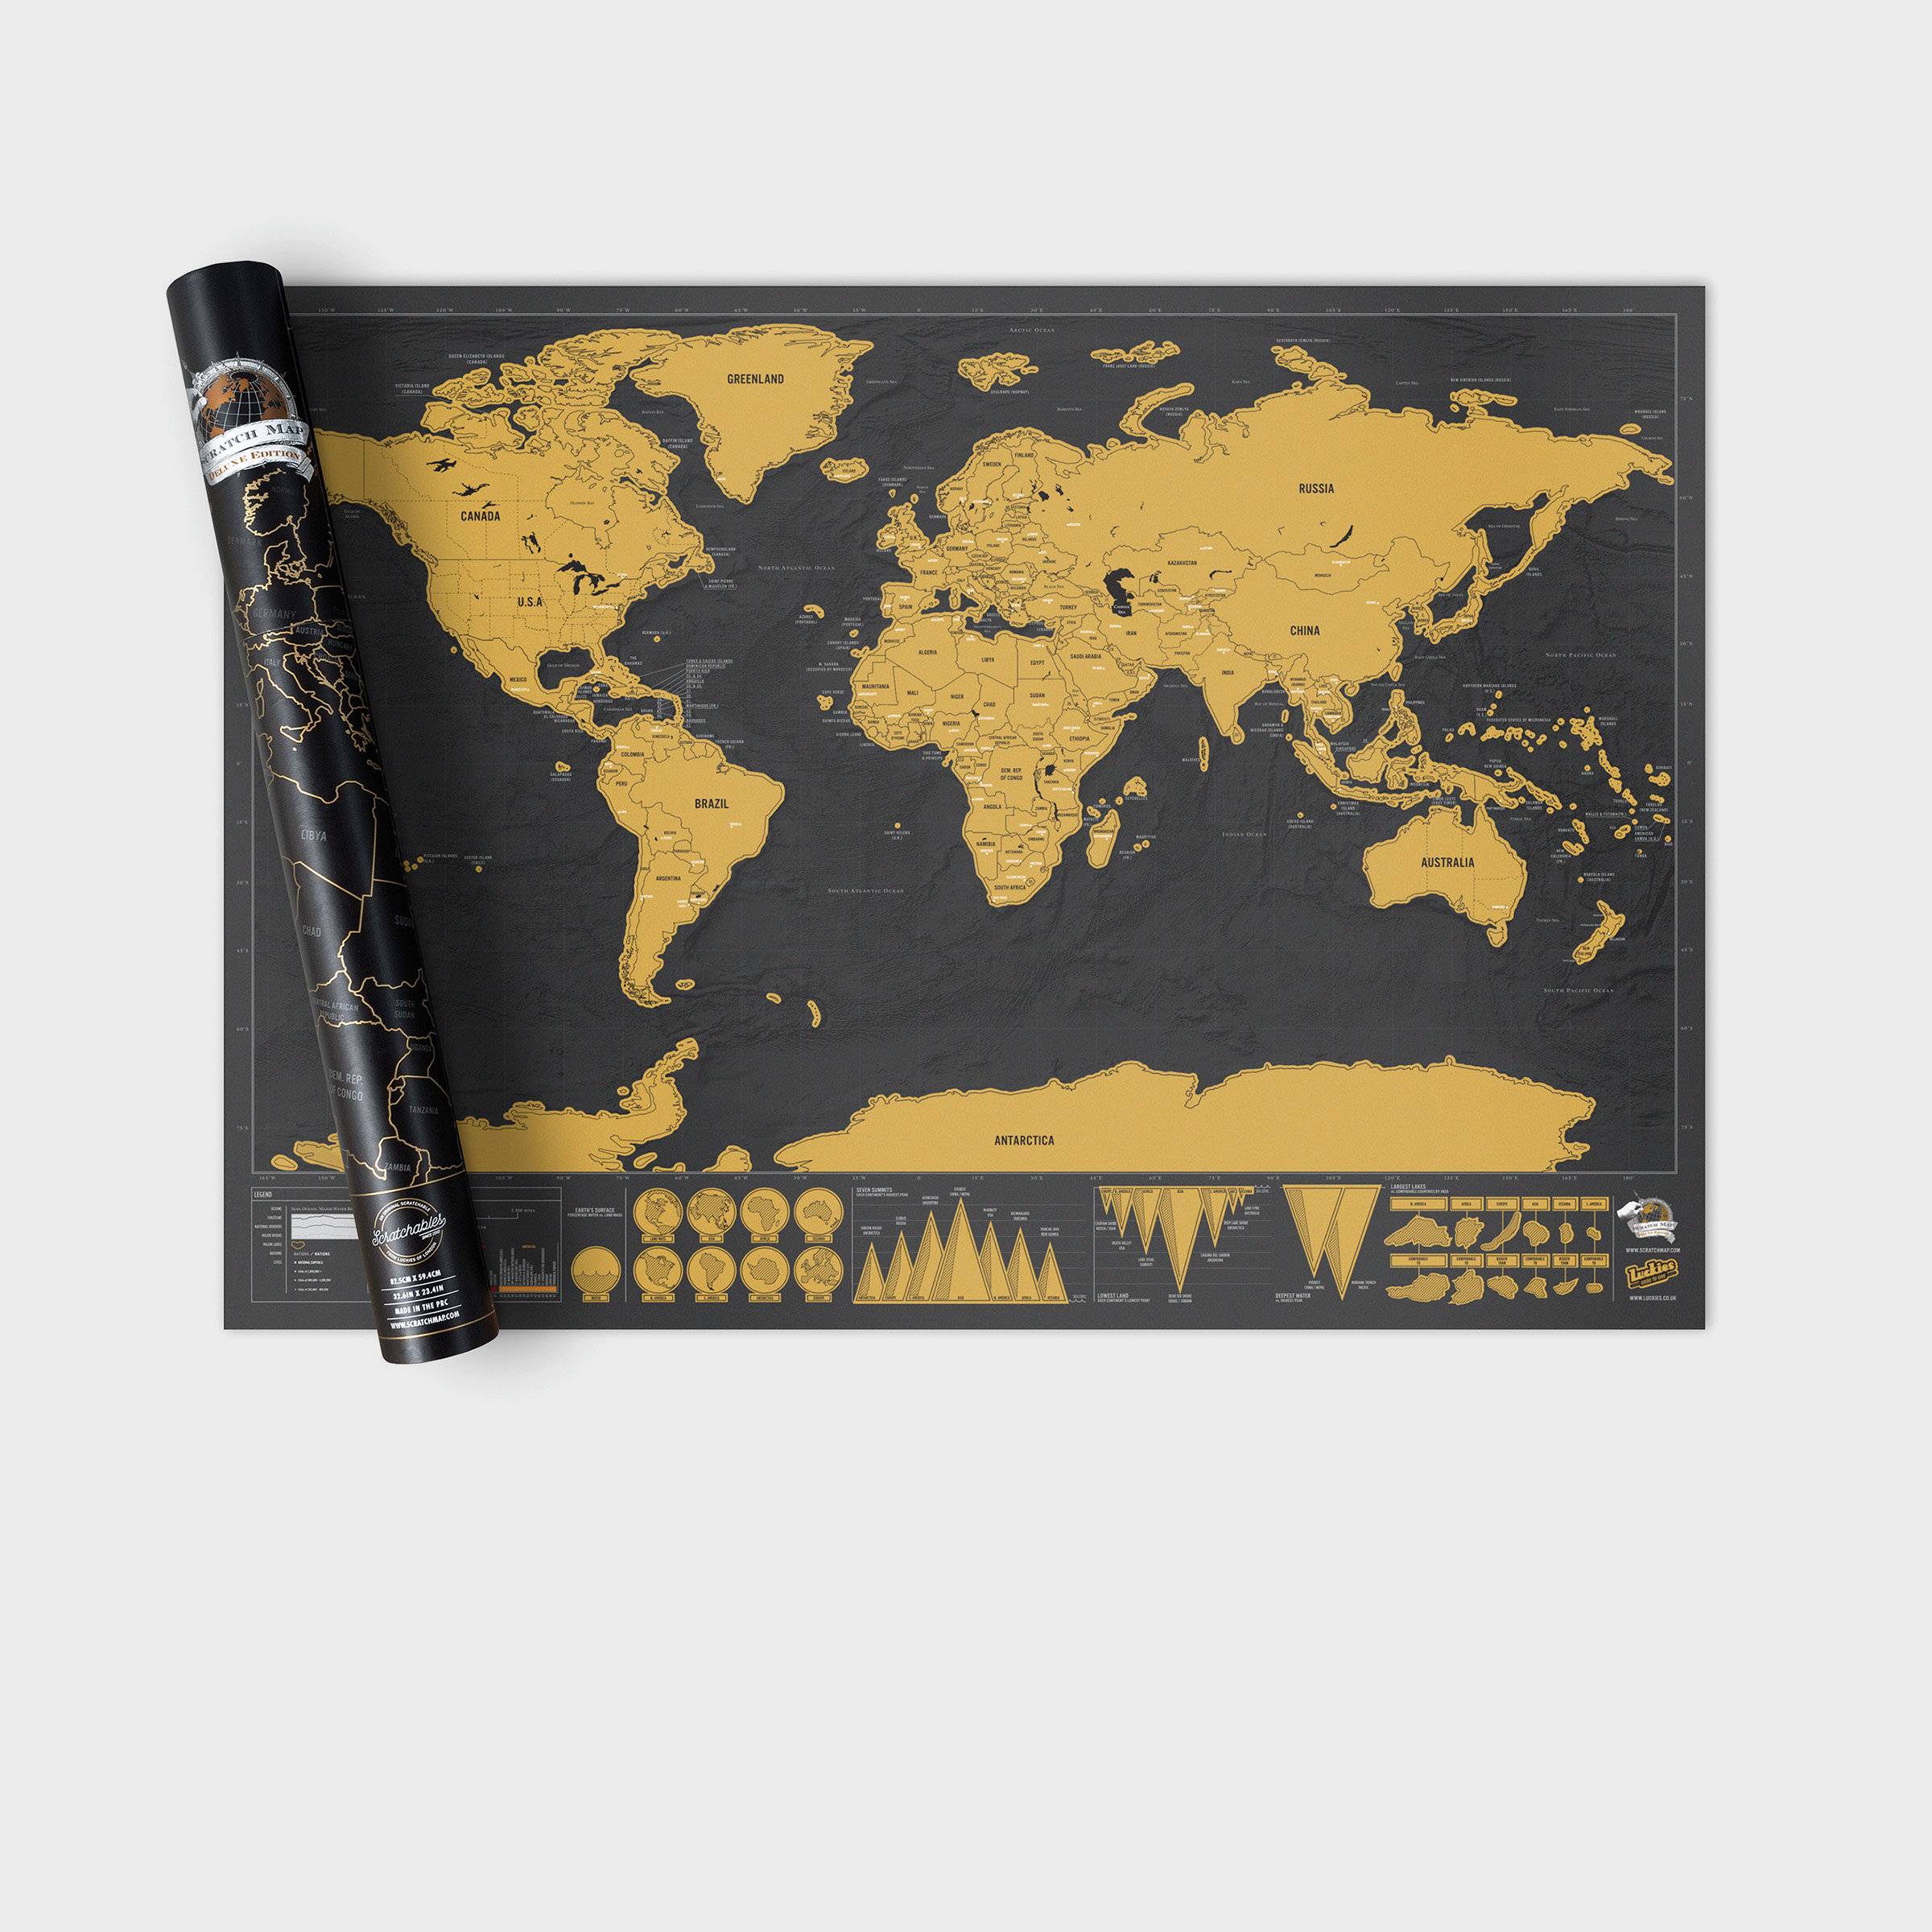 Deluxe Scratch Map by Luckies of London